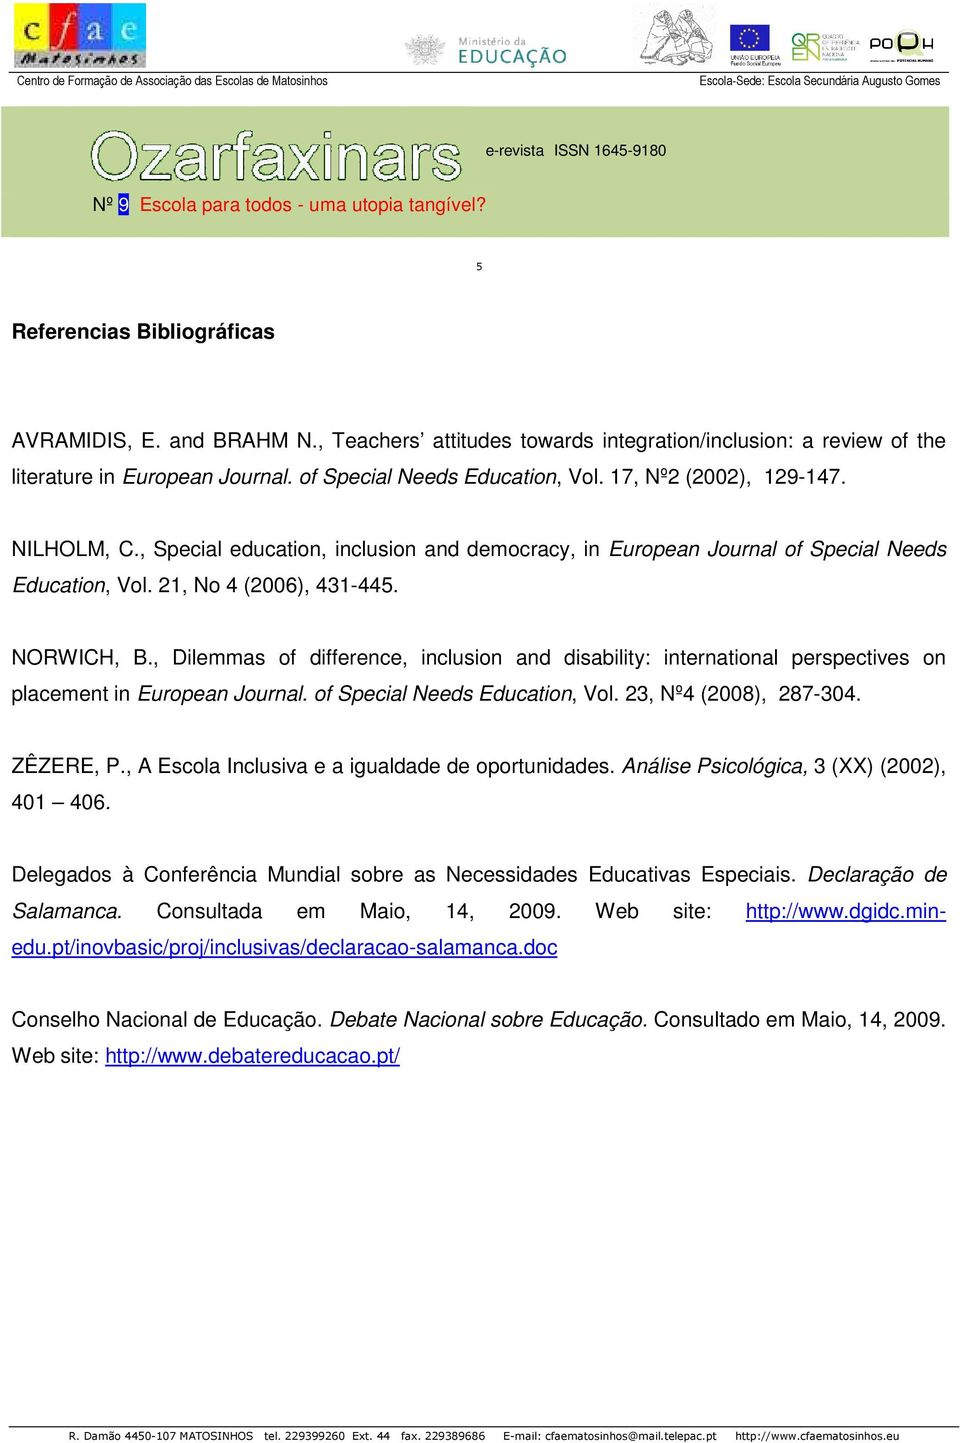 , Dilemmas of difference, inclusion and disability: international perspectives on placement in European Journal. of Special Needs Education, Vol. 23, Nº4 (2008), 287-304. ZÊZERE, P.